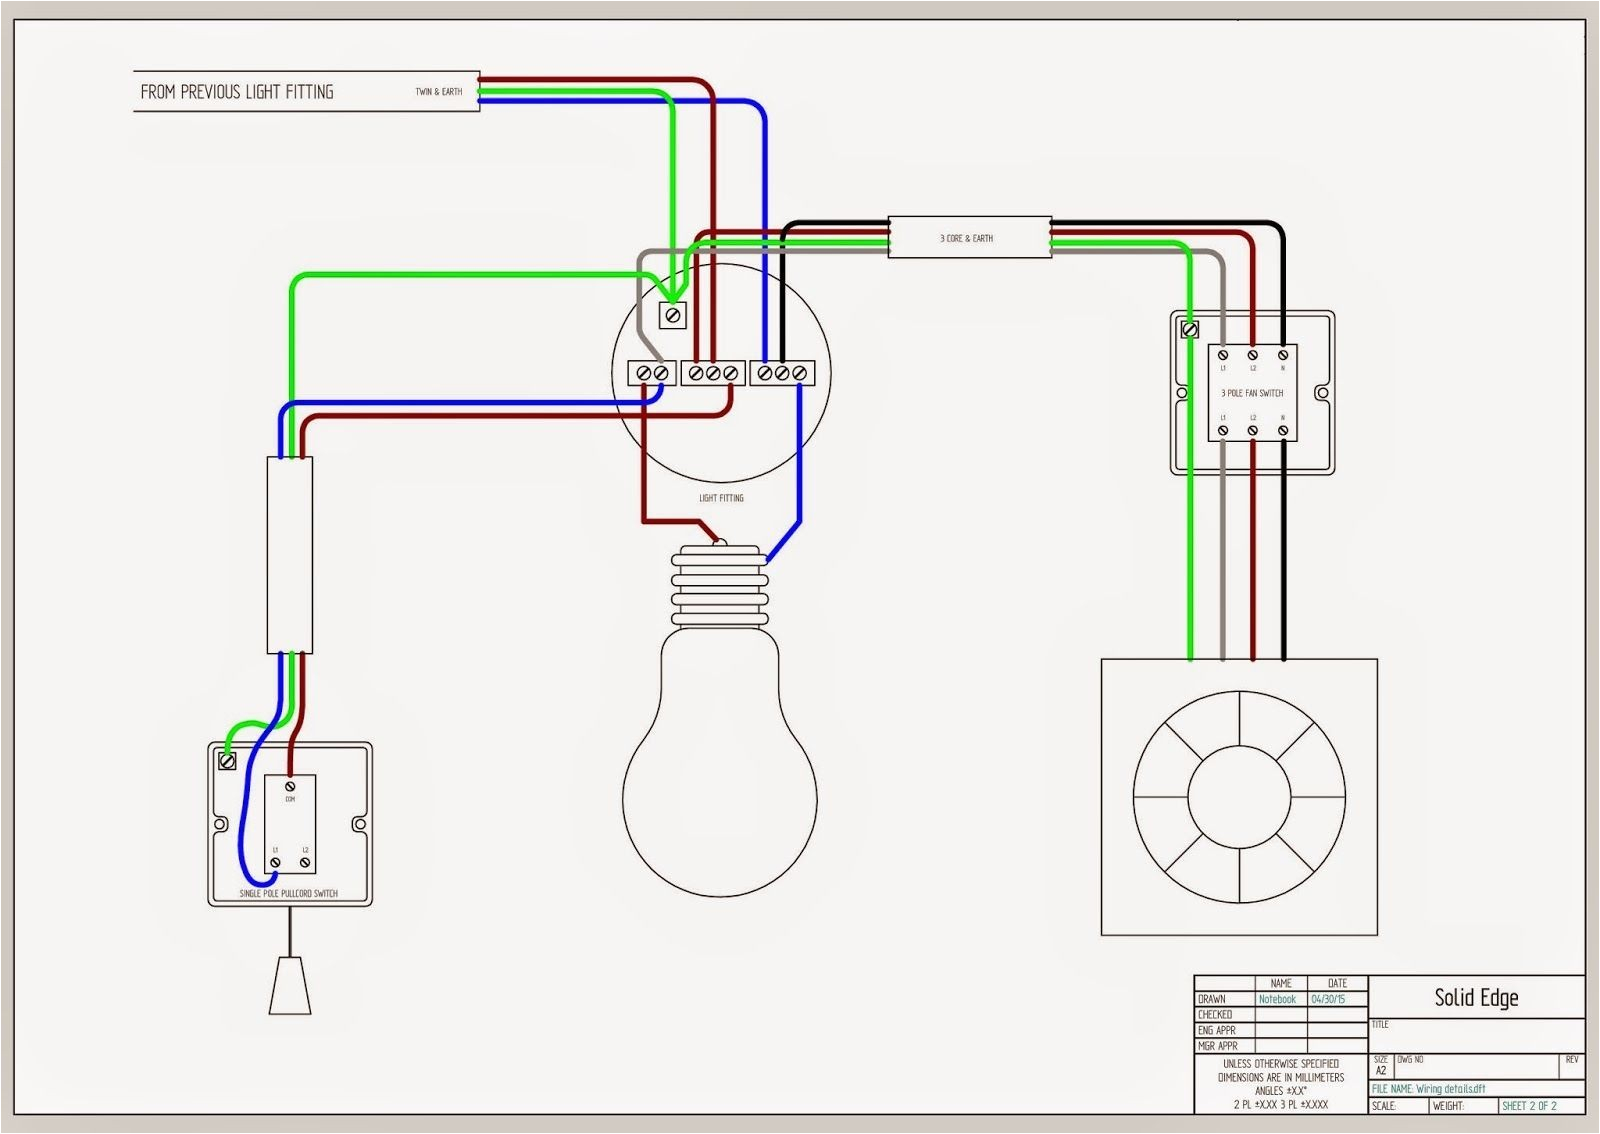 wiring a broan fan light schema diagram database bathroom exhaust fan with light wiring diagram moreover